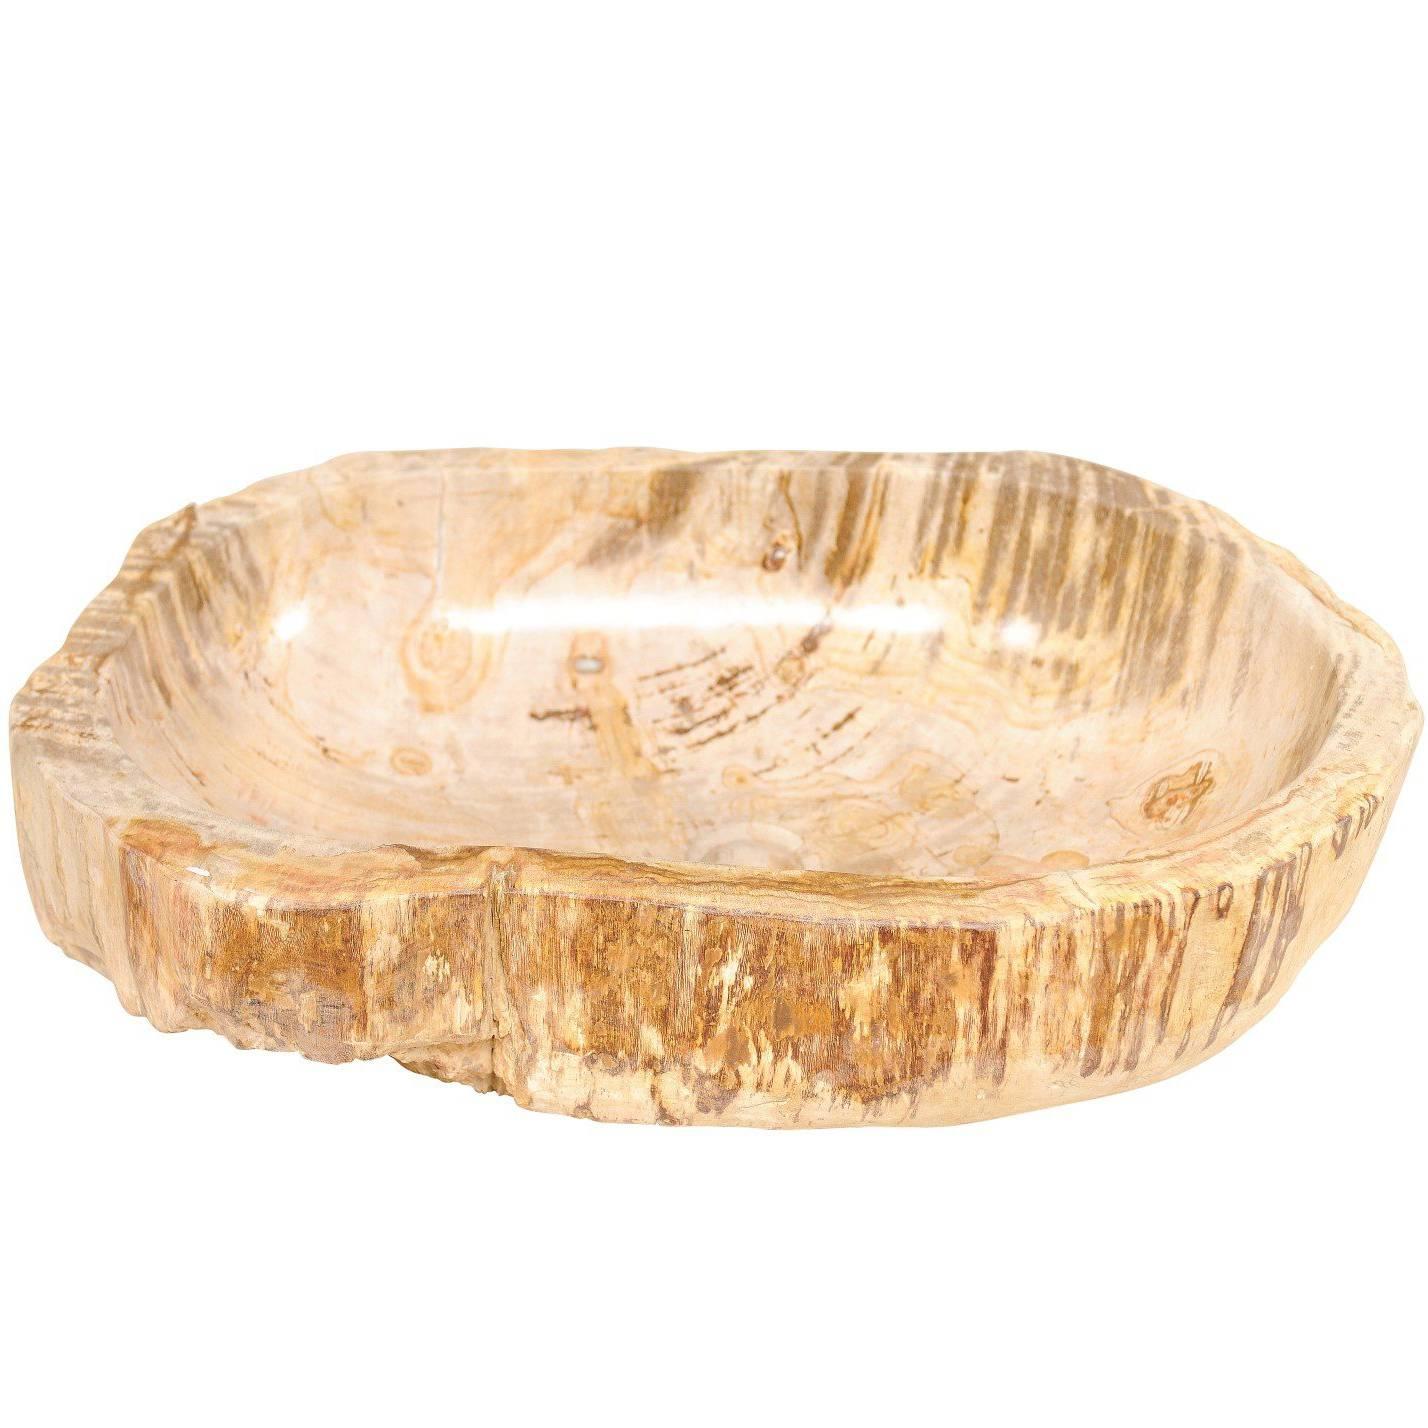 An Oval Shaped Petrified Wood Sink with Polished Basin and Live-Edge Exterior For Sale